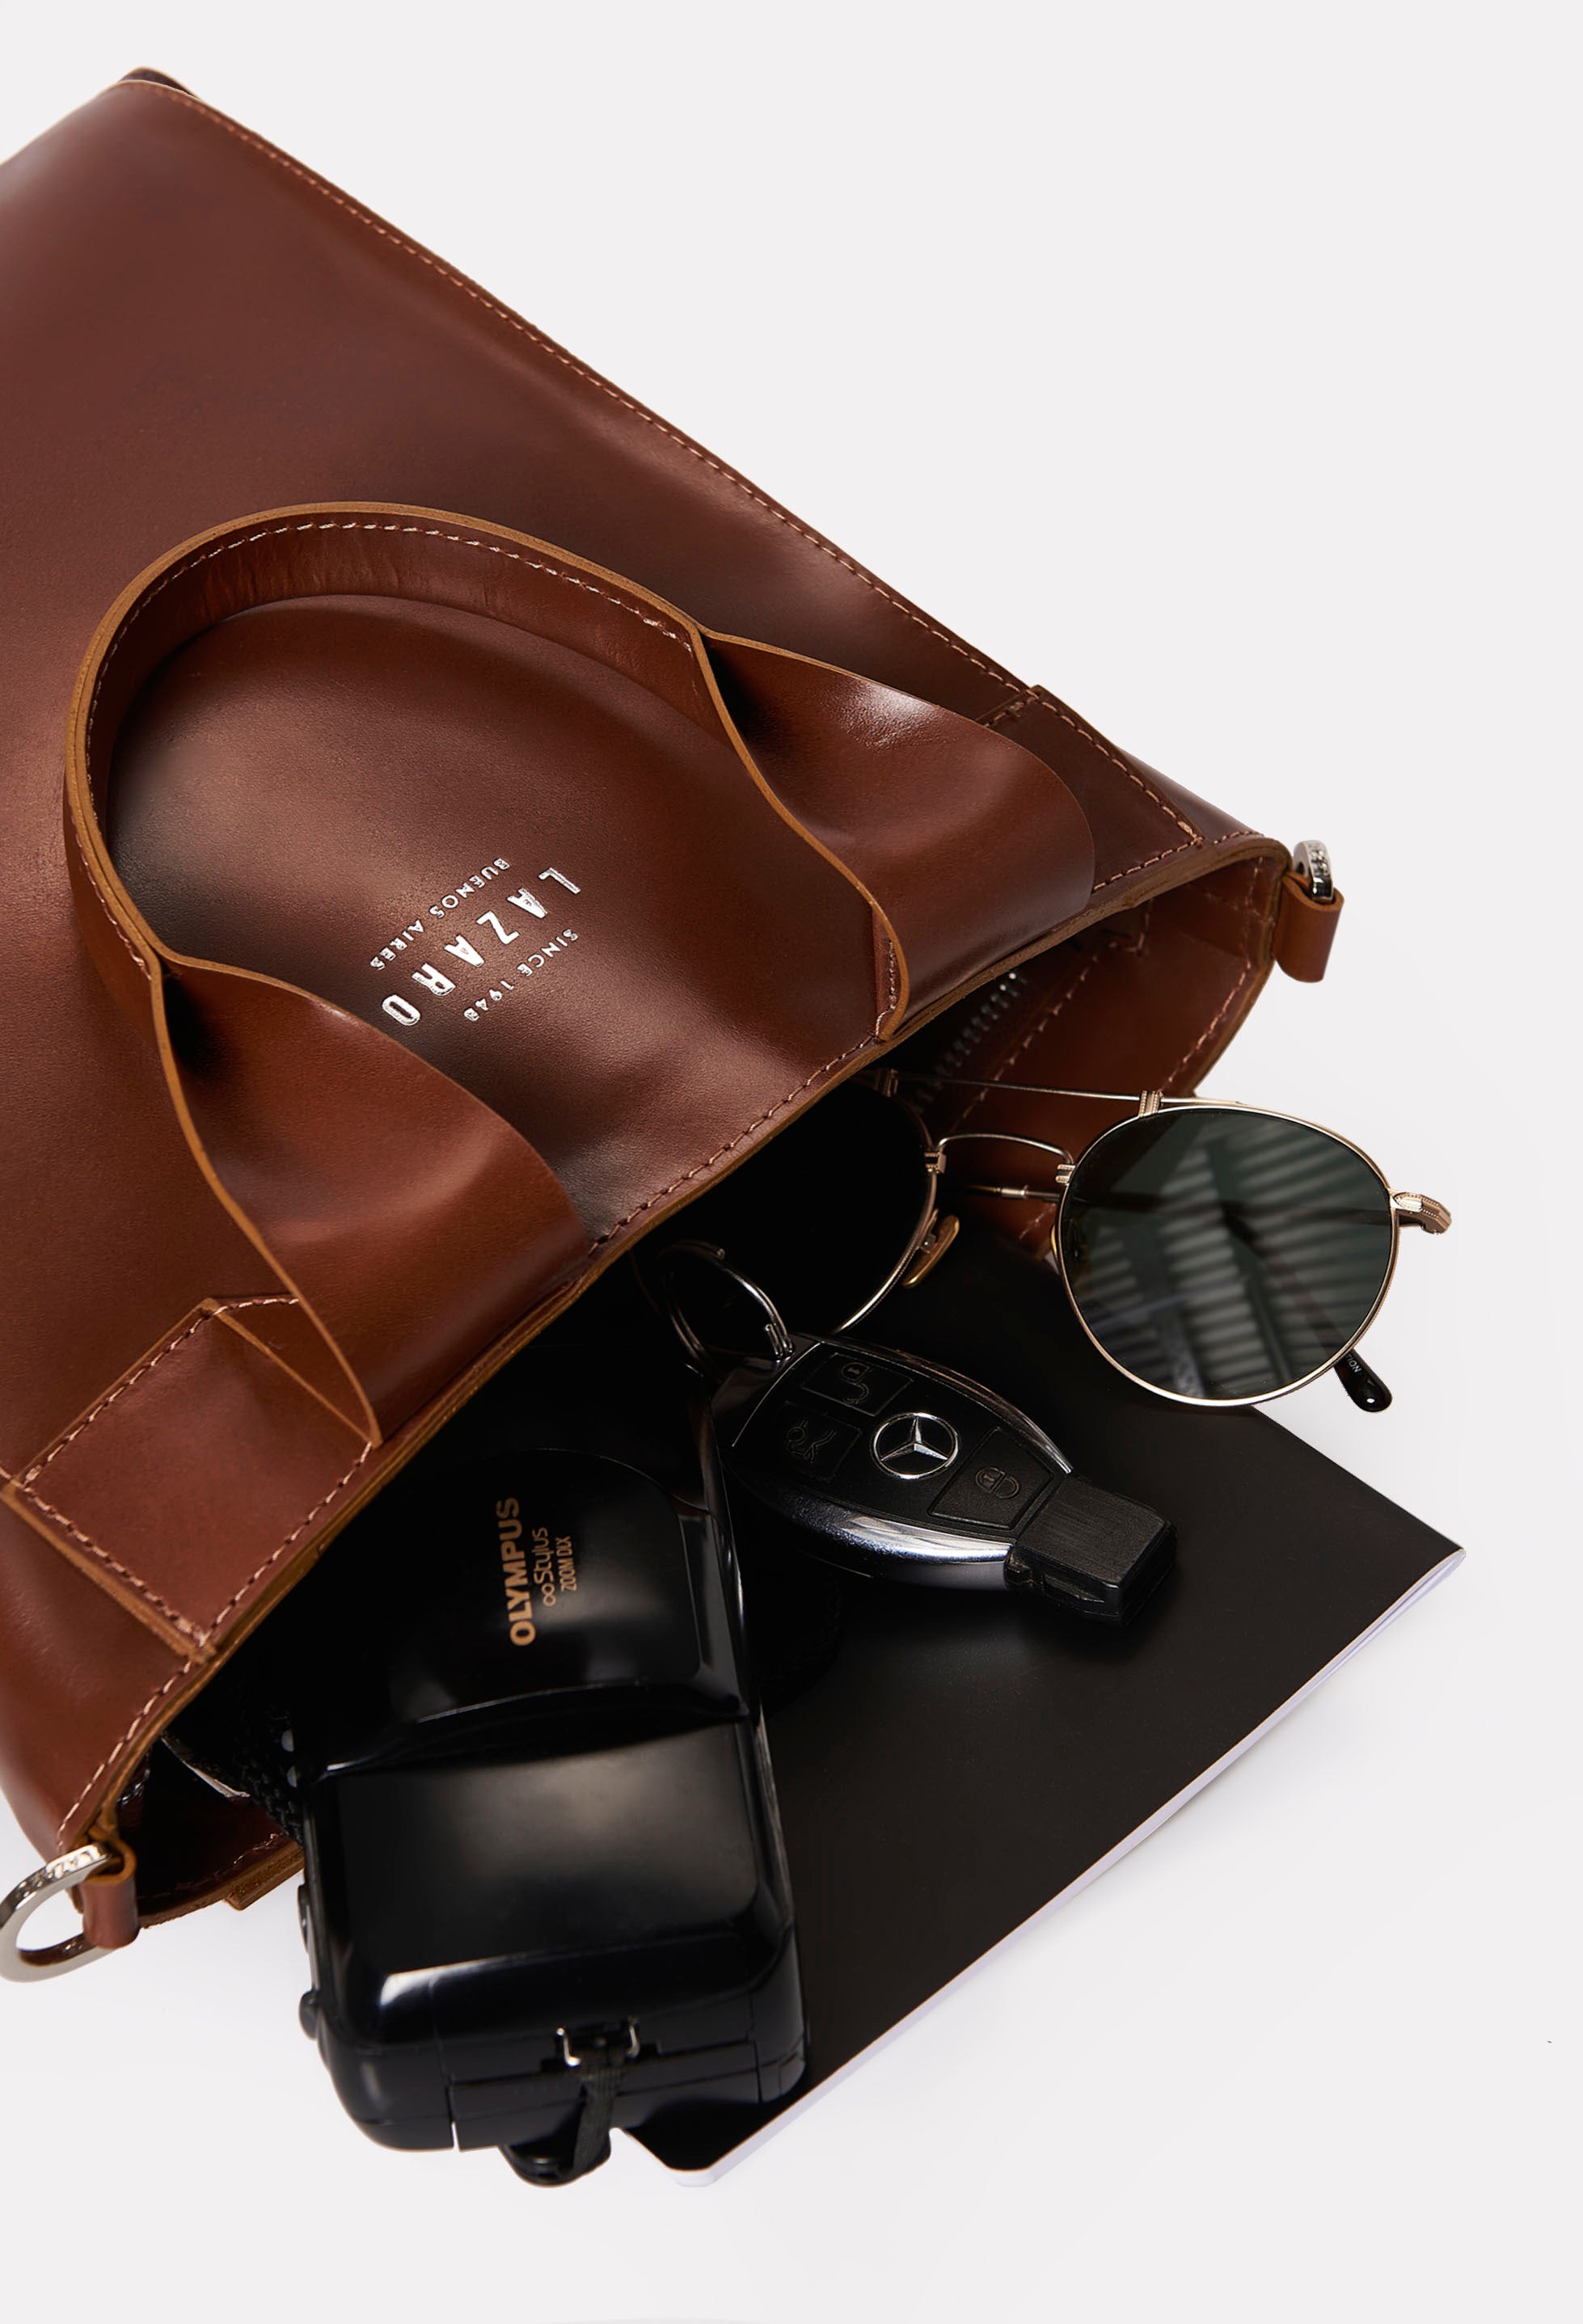 Interior of a Tan Leather Mini Tote Bag Lambro that shows the bag packed with a camera, sunglasses, car keys and a notebook.